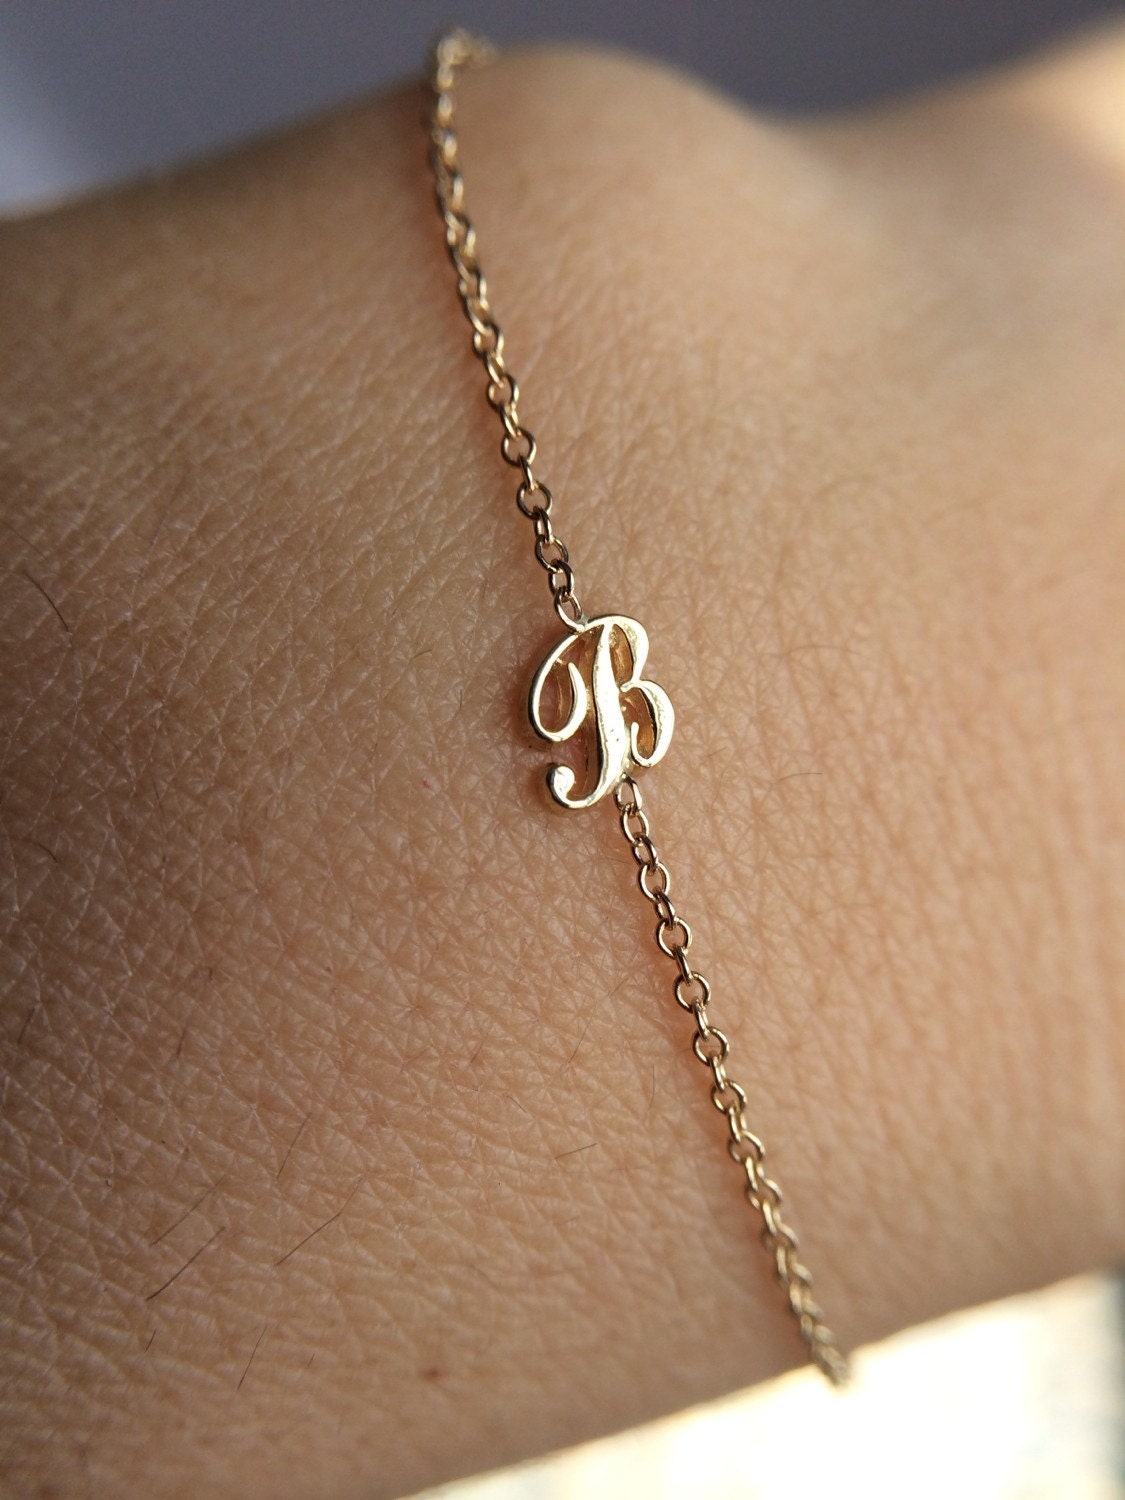 14k solid gold personalized initial bracelet name by NOSTALGII